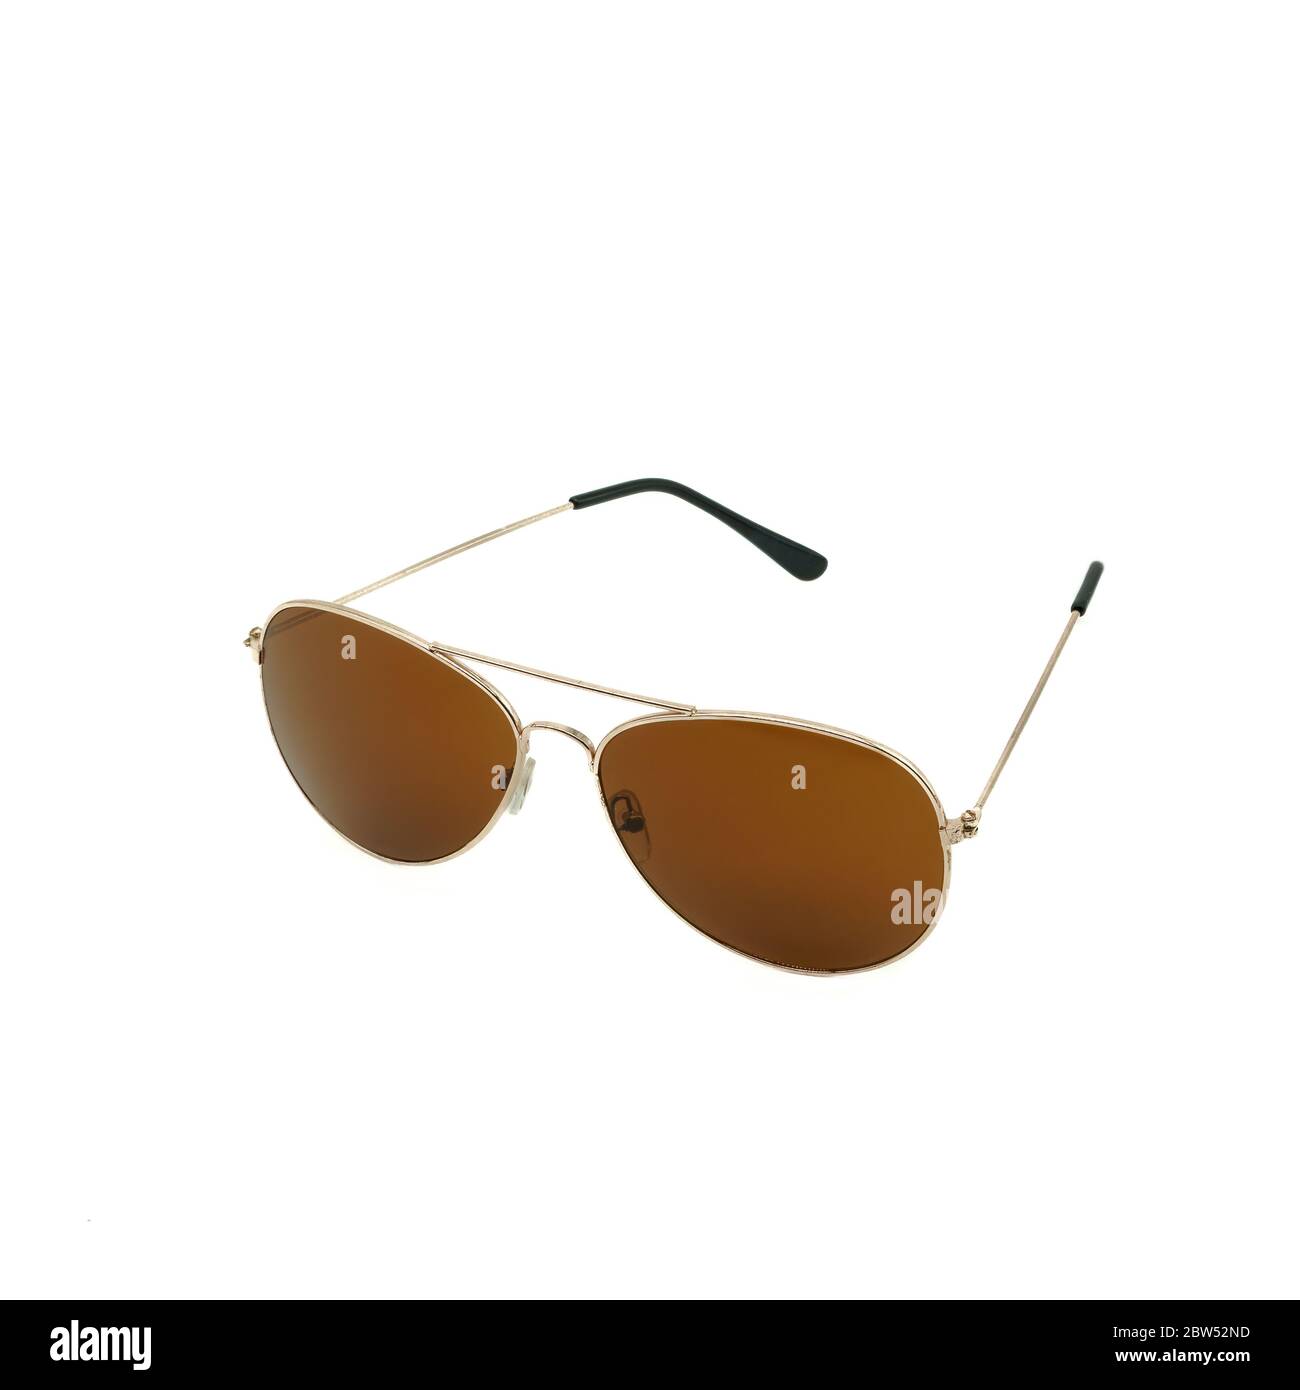 Brown mirrored sunglasses with a gold frame, white background Stock Photo